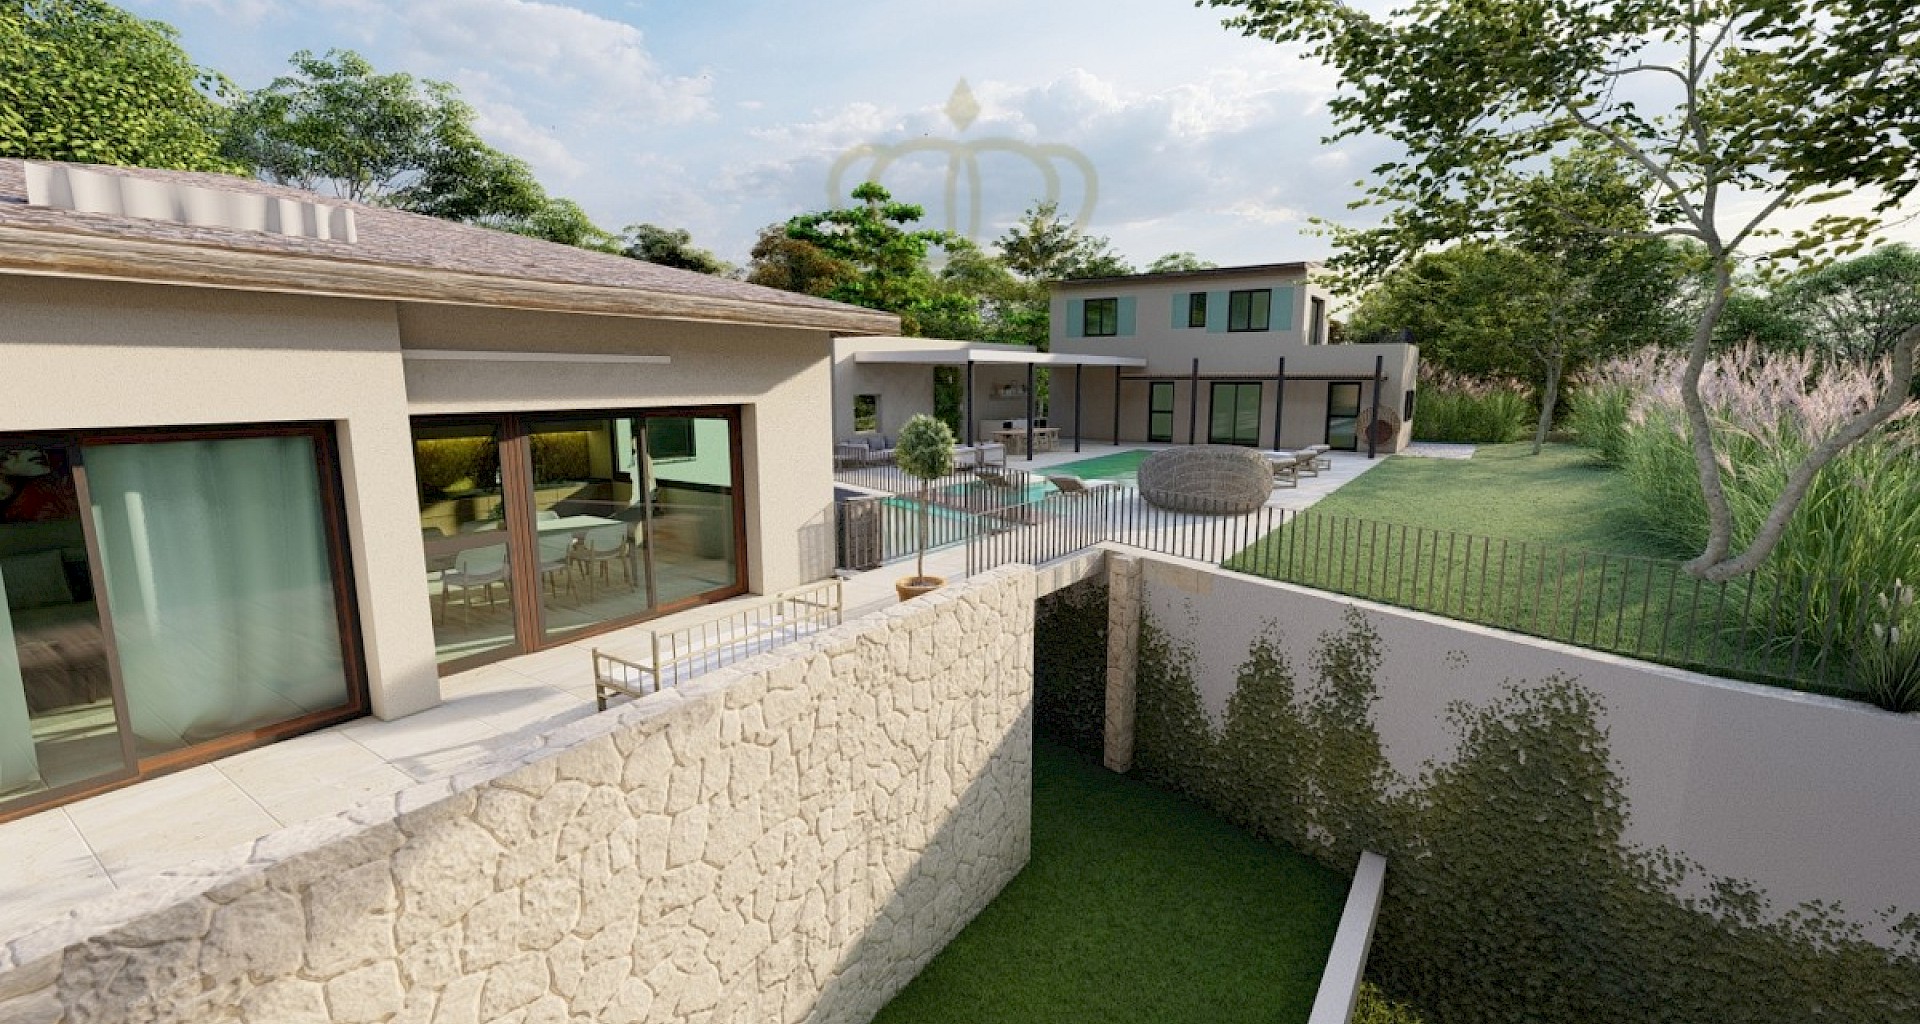 KROHN & LUEDEMANN Top villa project in Mallorca Paguera with building licence 